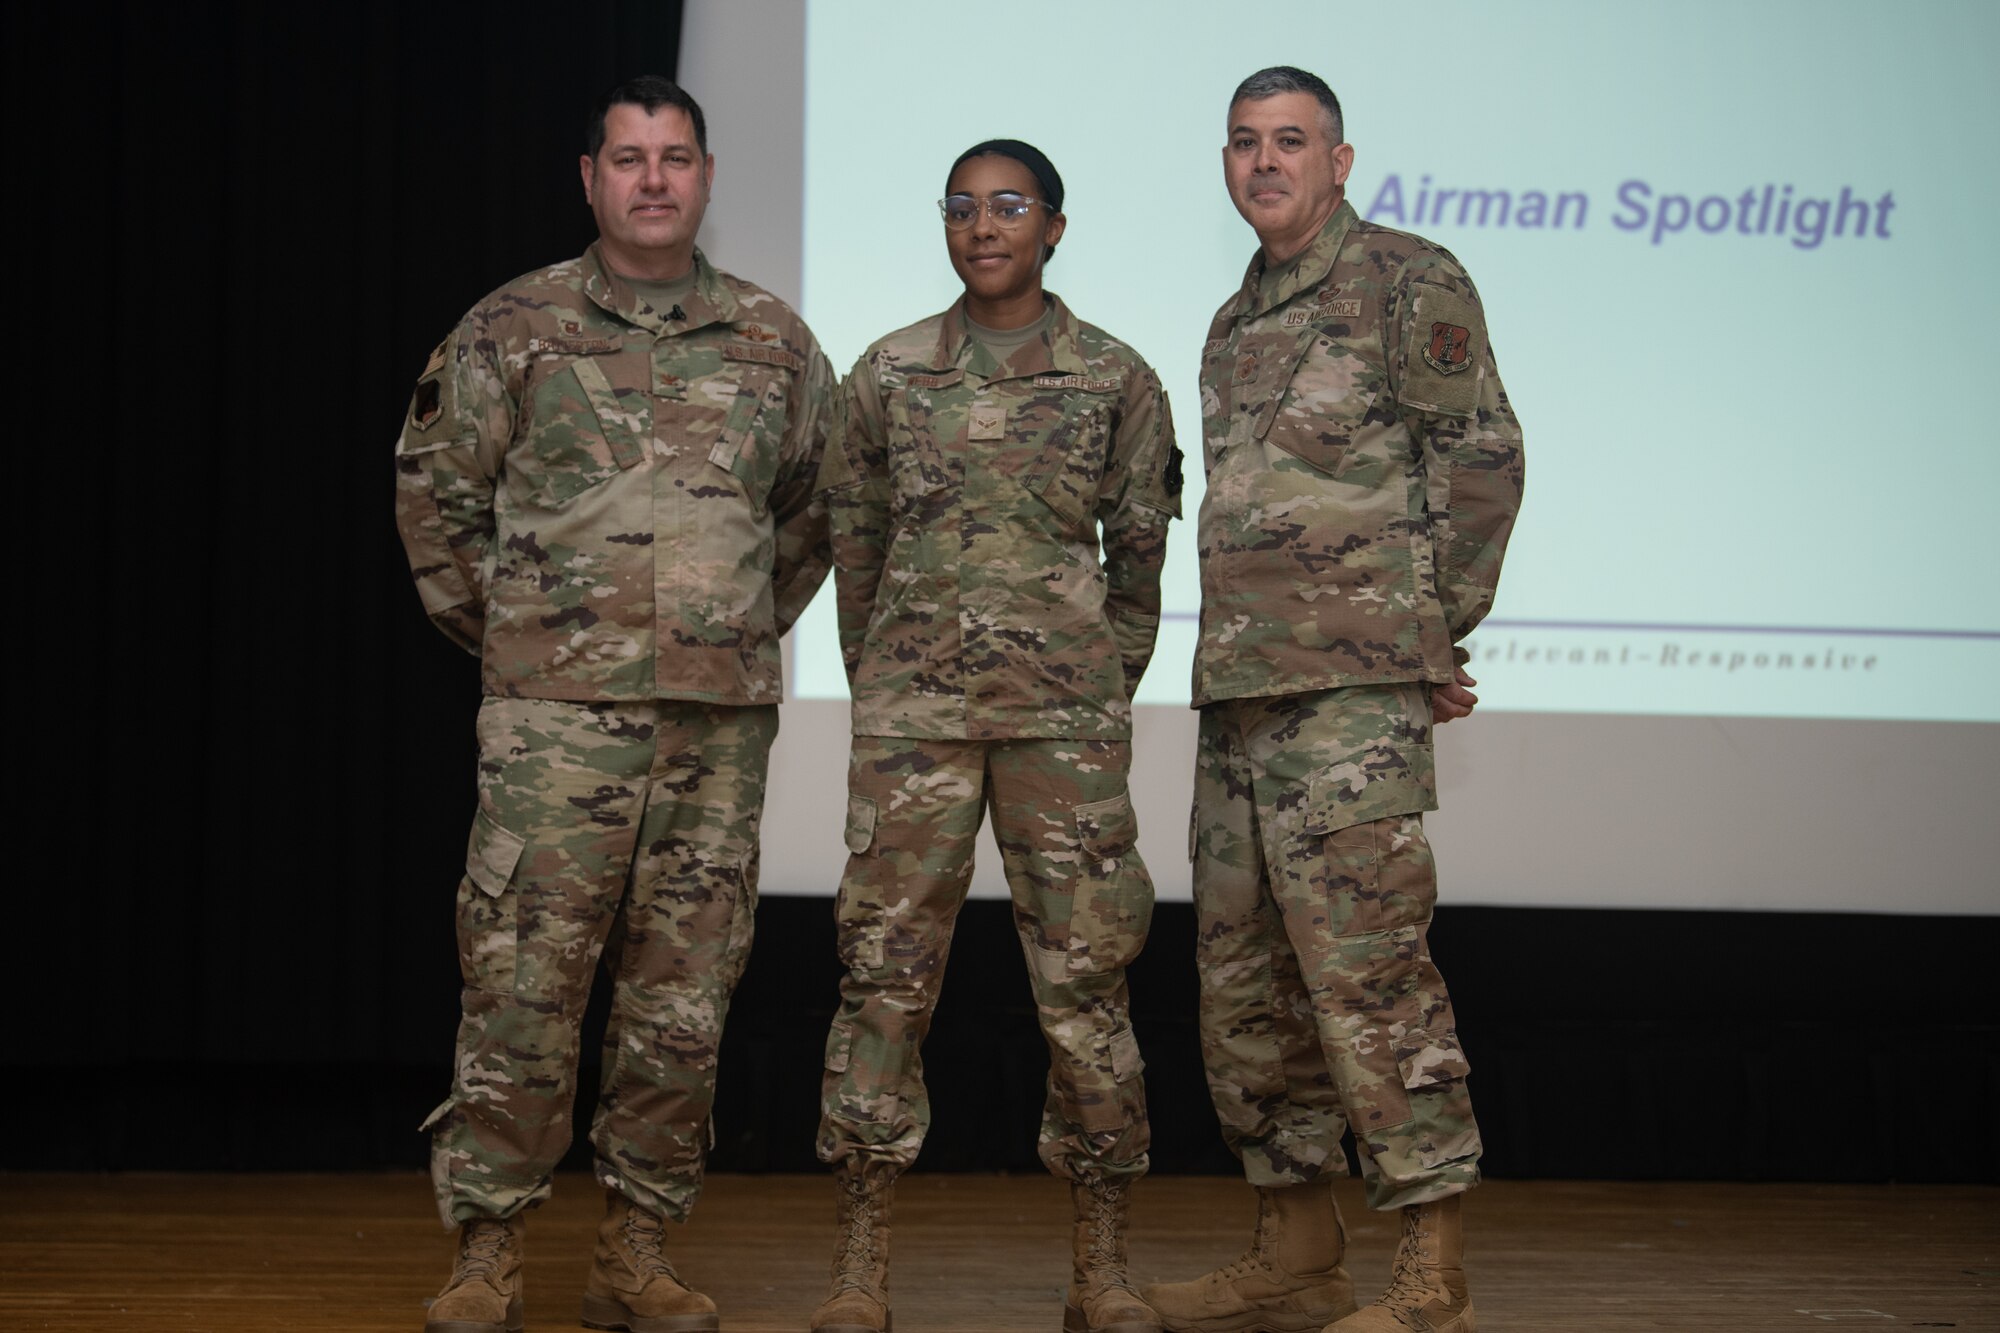 From left, Col. Christopher G. Batterton, 192nd Wing commander, Airman 1st Class Taylor Webb, 192nd Operations Support Squadron, and Chief Master Sgt. Richard Roberts, 192nd Wing command chief, pose for a photo.